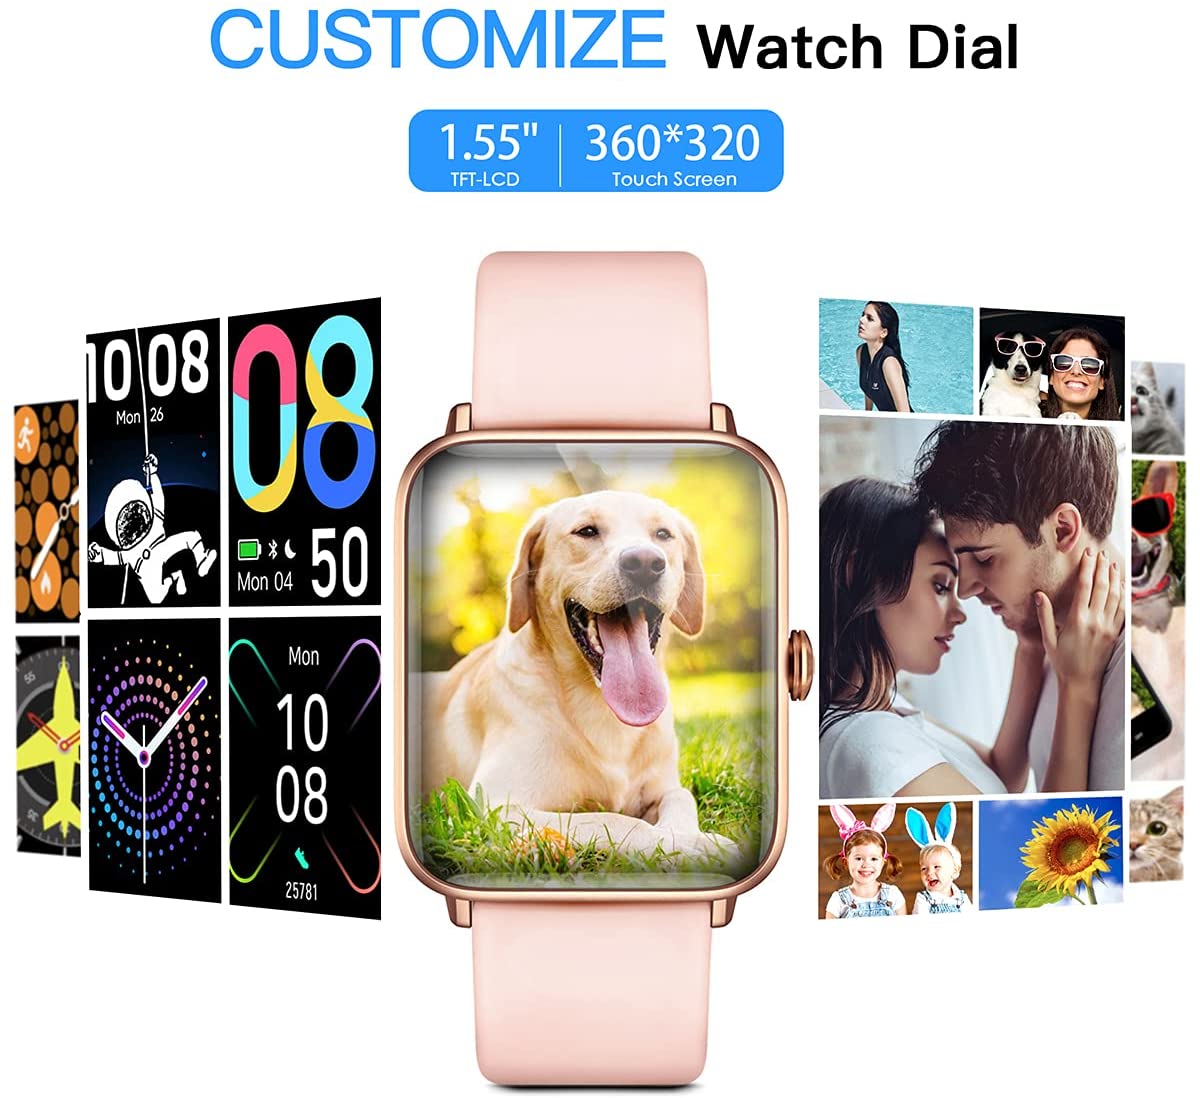 Pink Smartwatch with Heart Rate Monitor